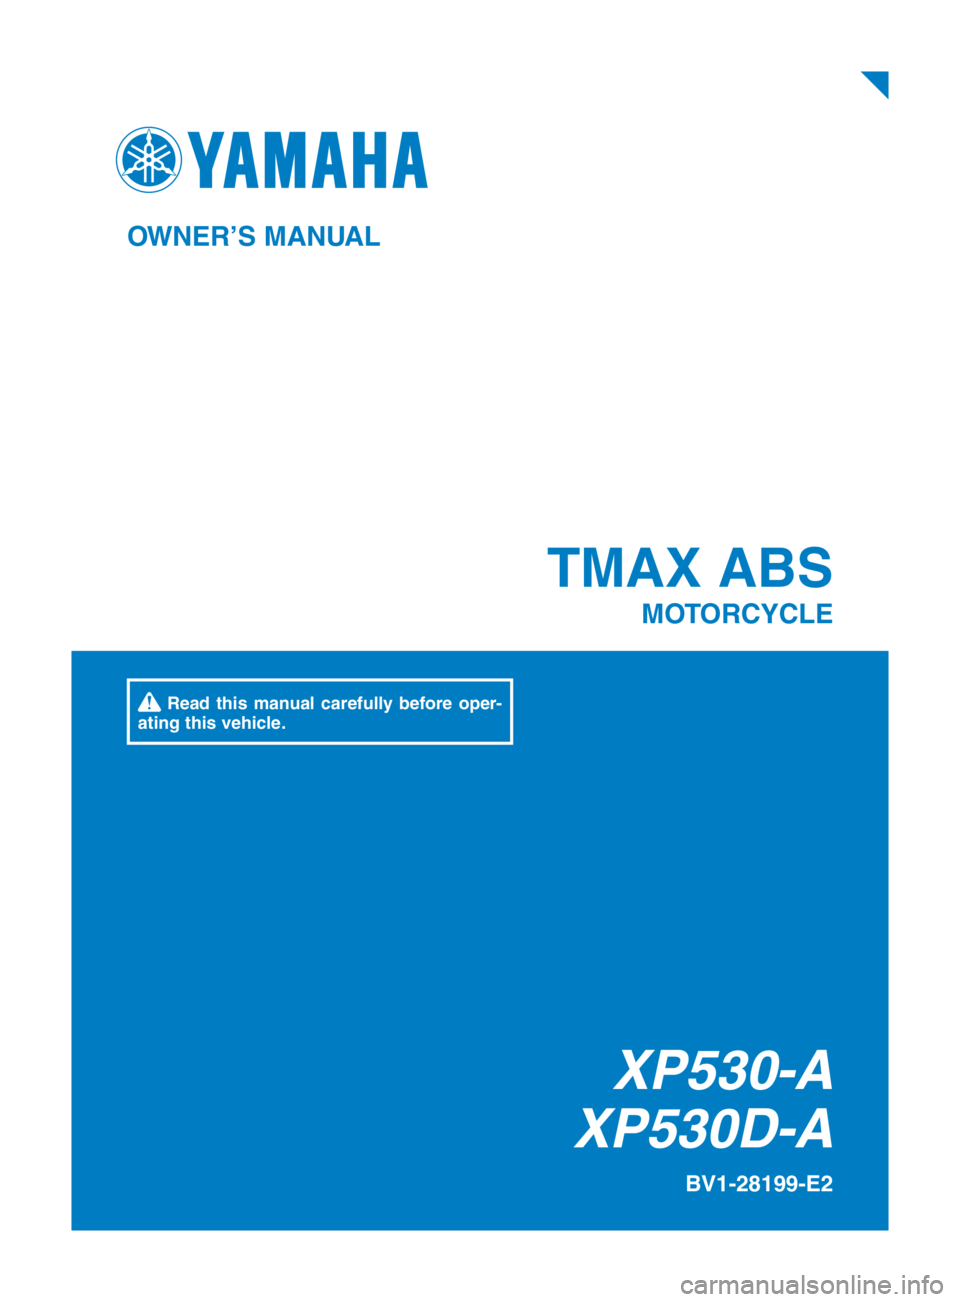 YAMAHA TMAX 2019  Owners Manual TMAX ABS
MOTORCYCLE
BV1-28199-E2
OWNER’S MANUAL
 Read this manual carefully before oper-
ating this vehicle.
XP530-A
XP530D-A
BV1-28199-E2_Hyoshi.indd   12018/09/04   15:31:48 